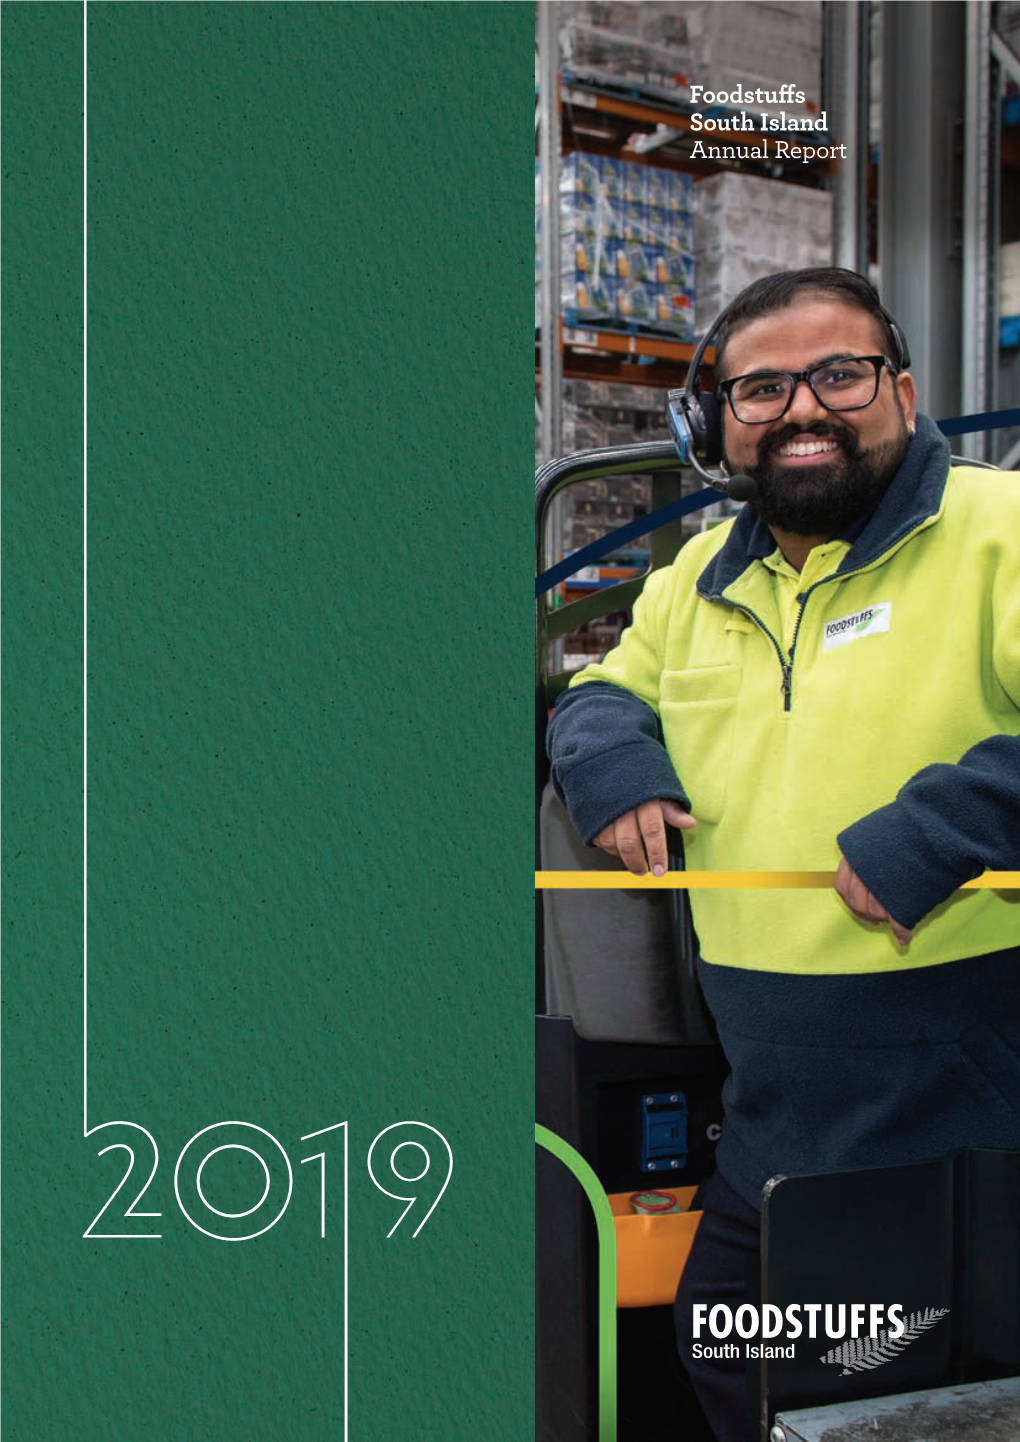 Foodstuffs South Island Annual Report